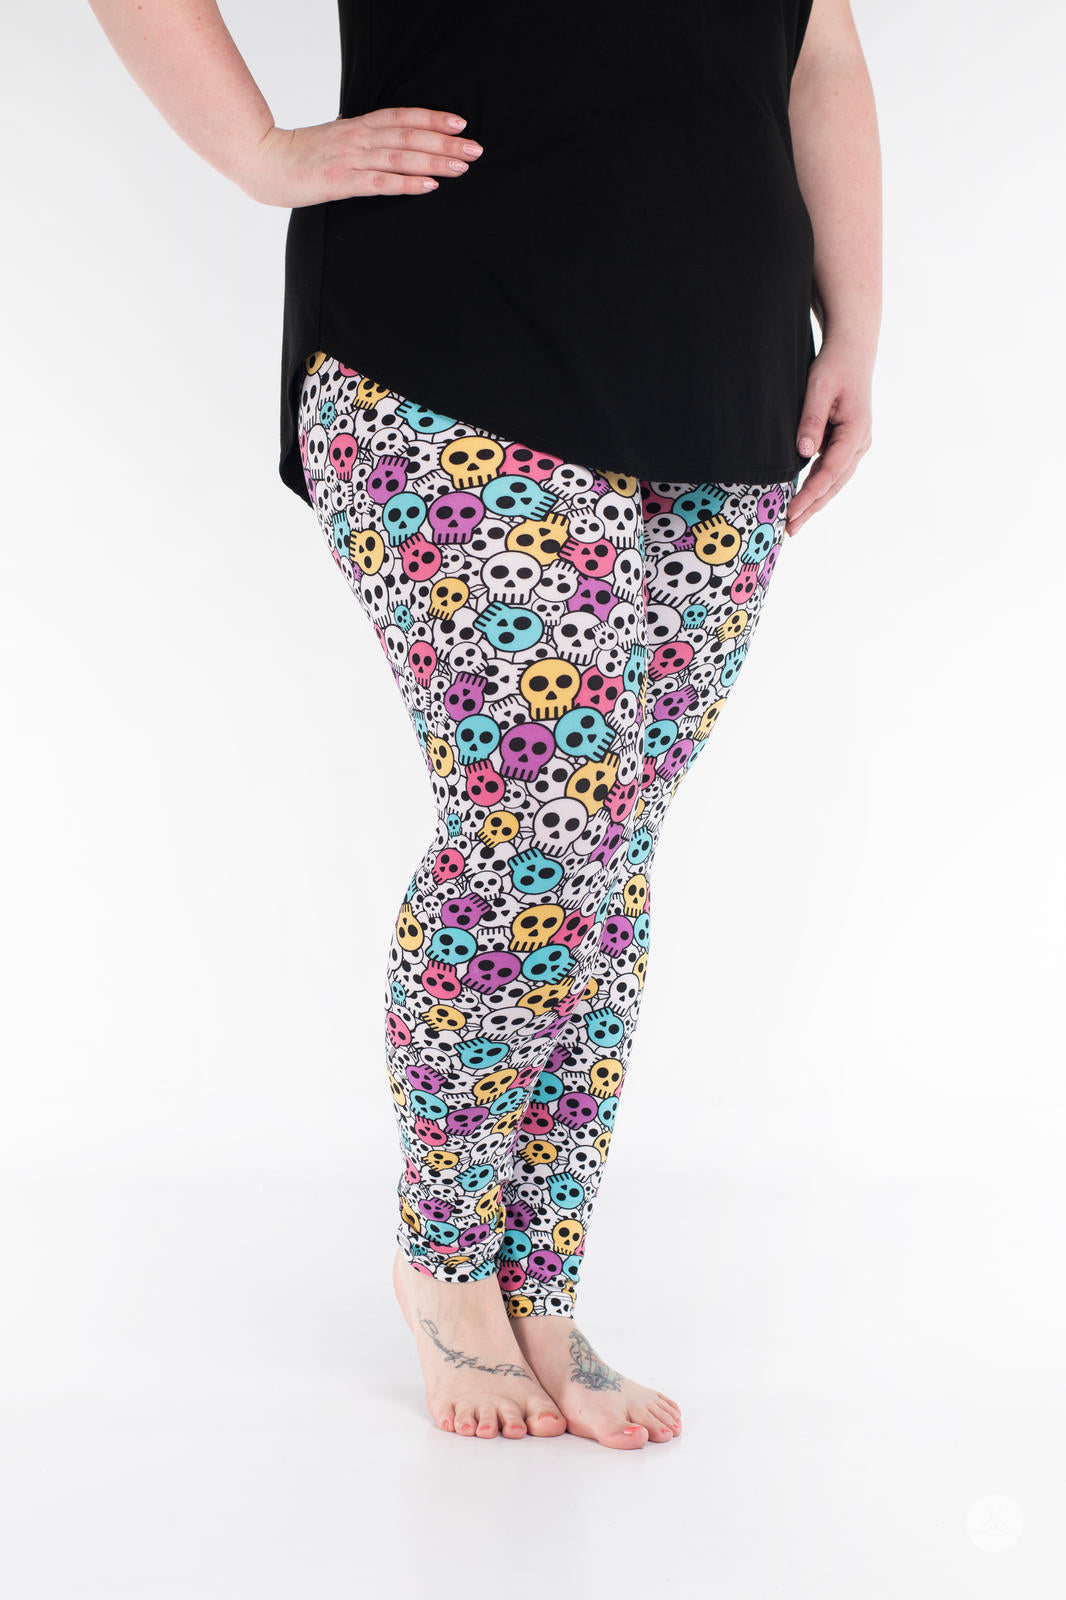 Frosted Skulls 25 Lifestyle Leggings - FINAL SALE - 2XL only